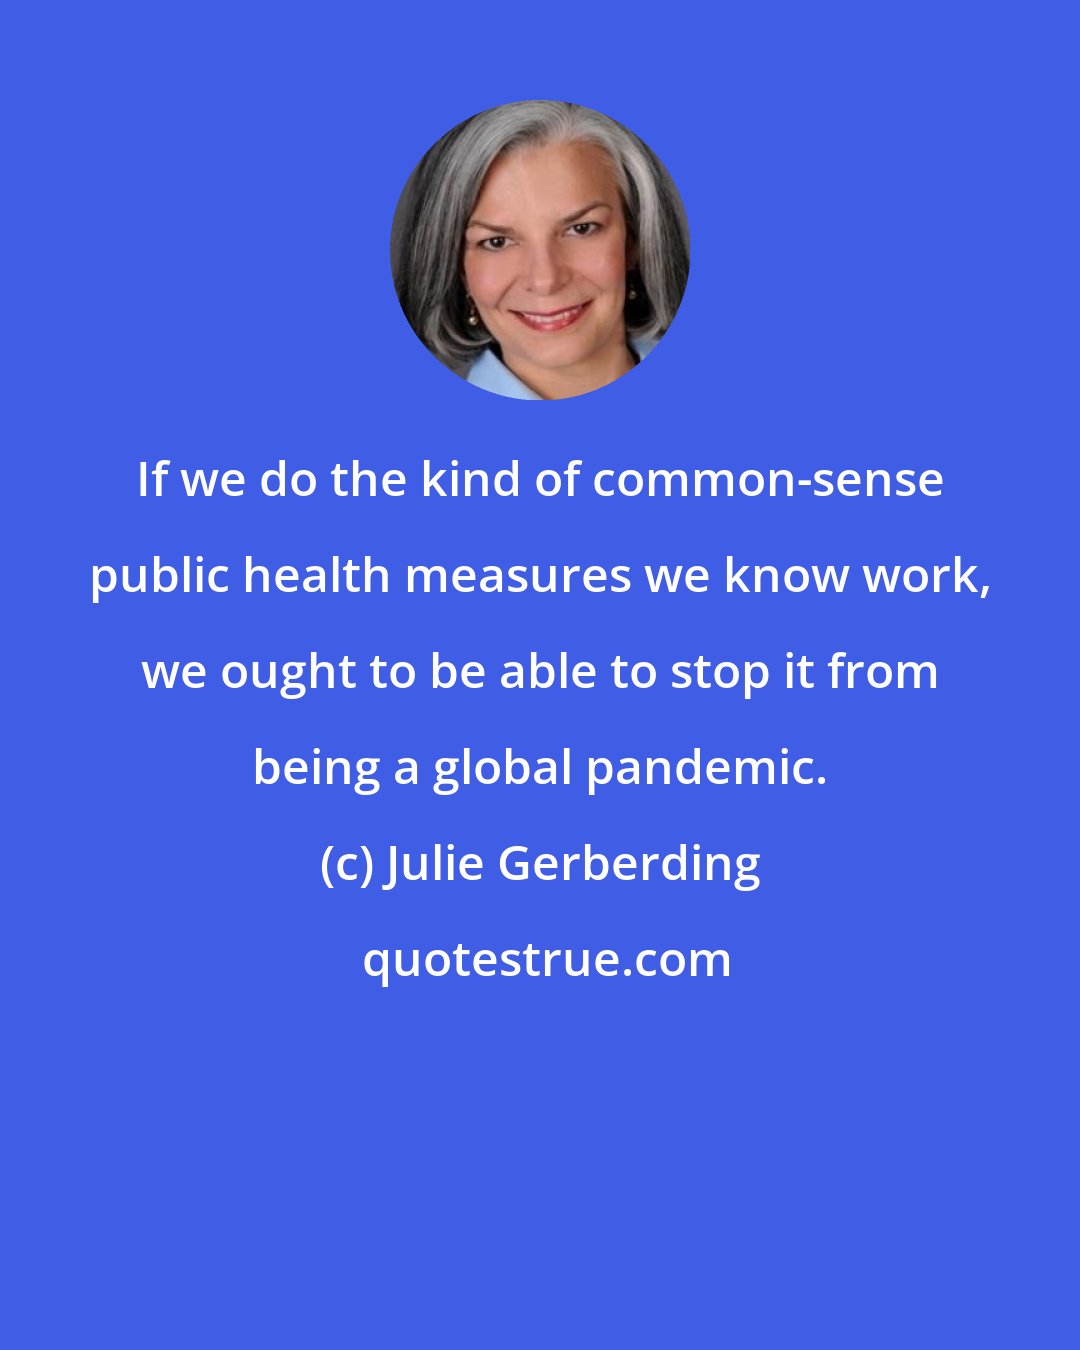 Julie Gerberding: If we do the kind of common-sense public health measures we know work, we ought to be able to stop it from being a global pandemic.